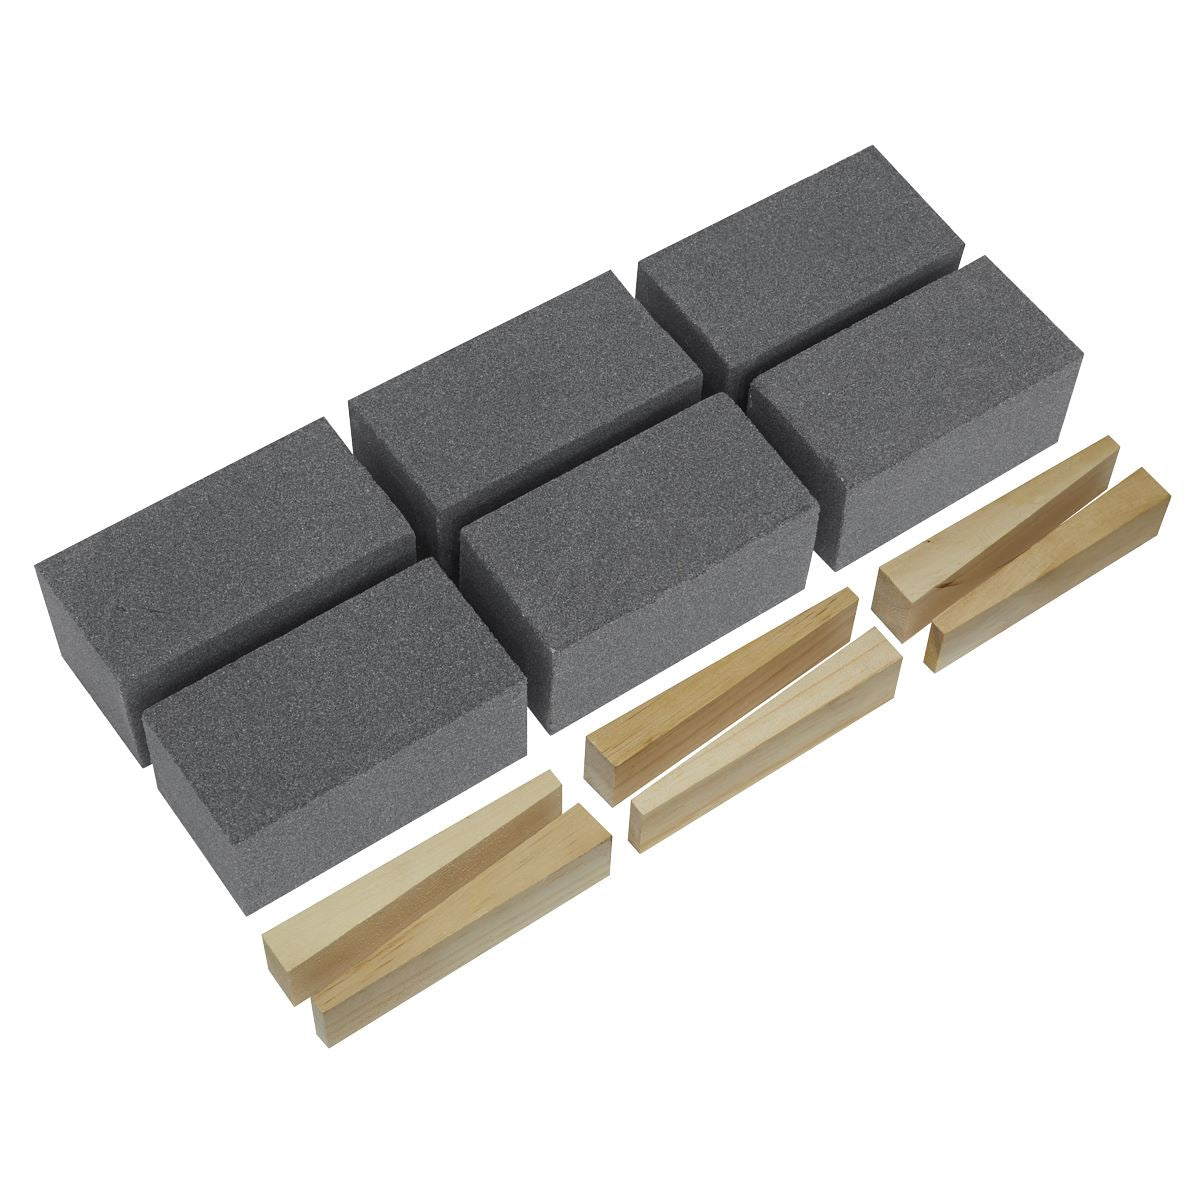 Worksafe by Sealey Floor Grinding Block 50 x 50 x 100mm 60Grit - Pack of 6